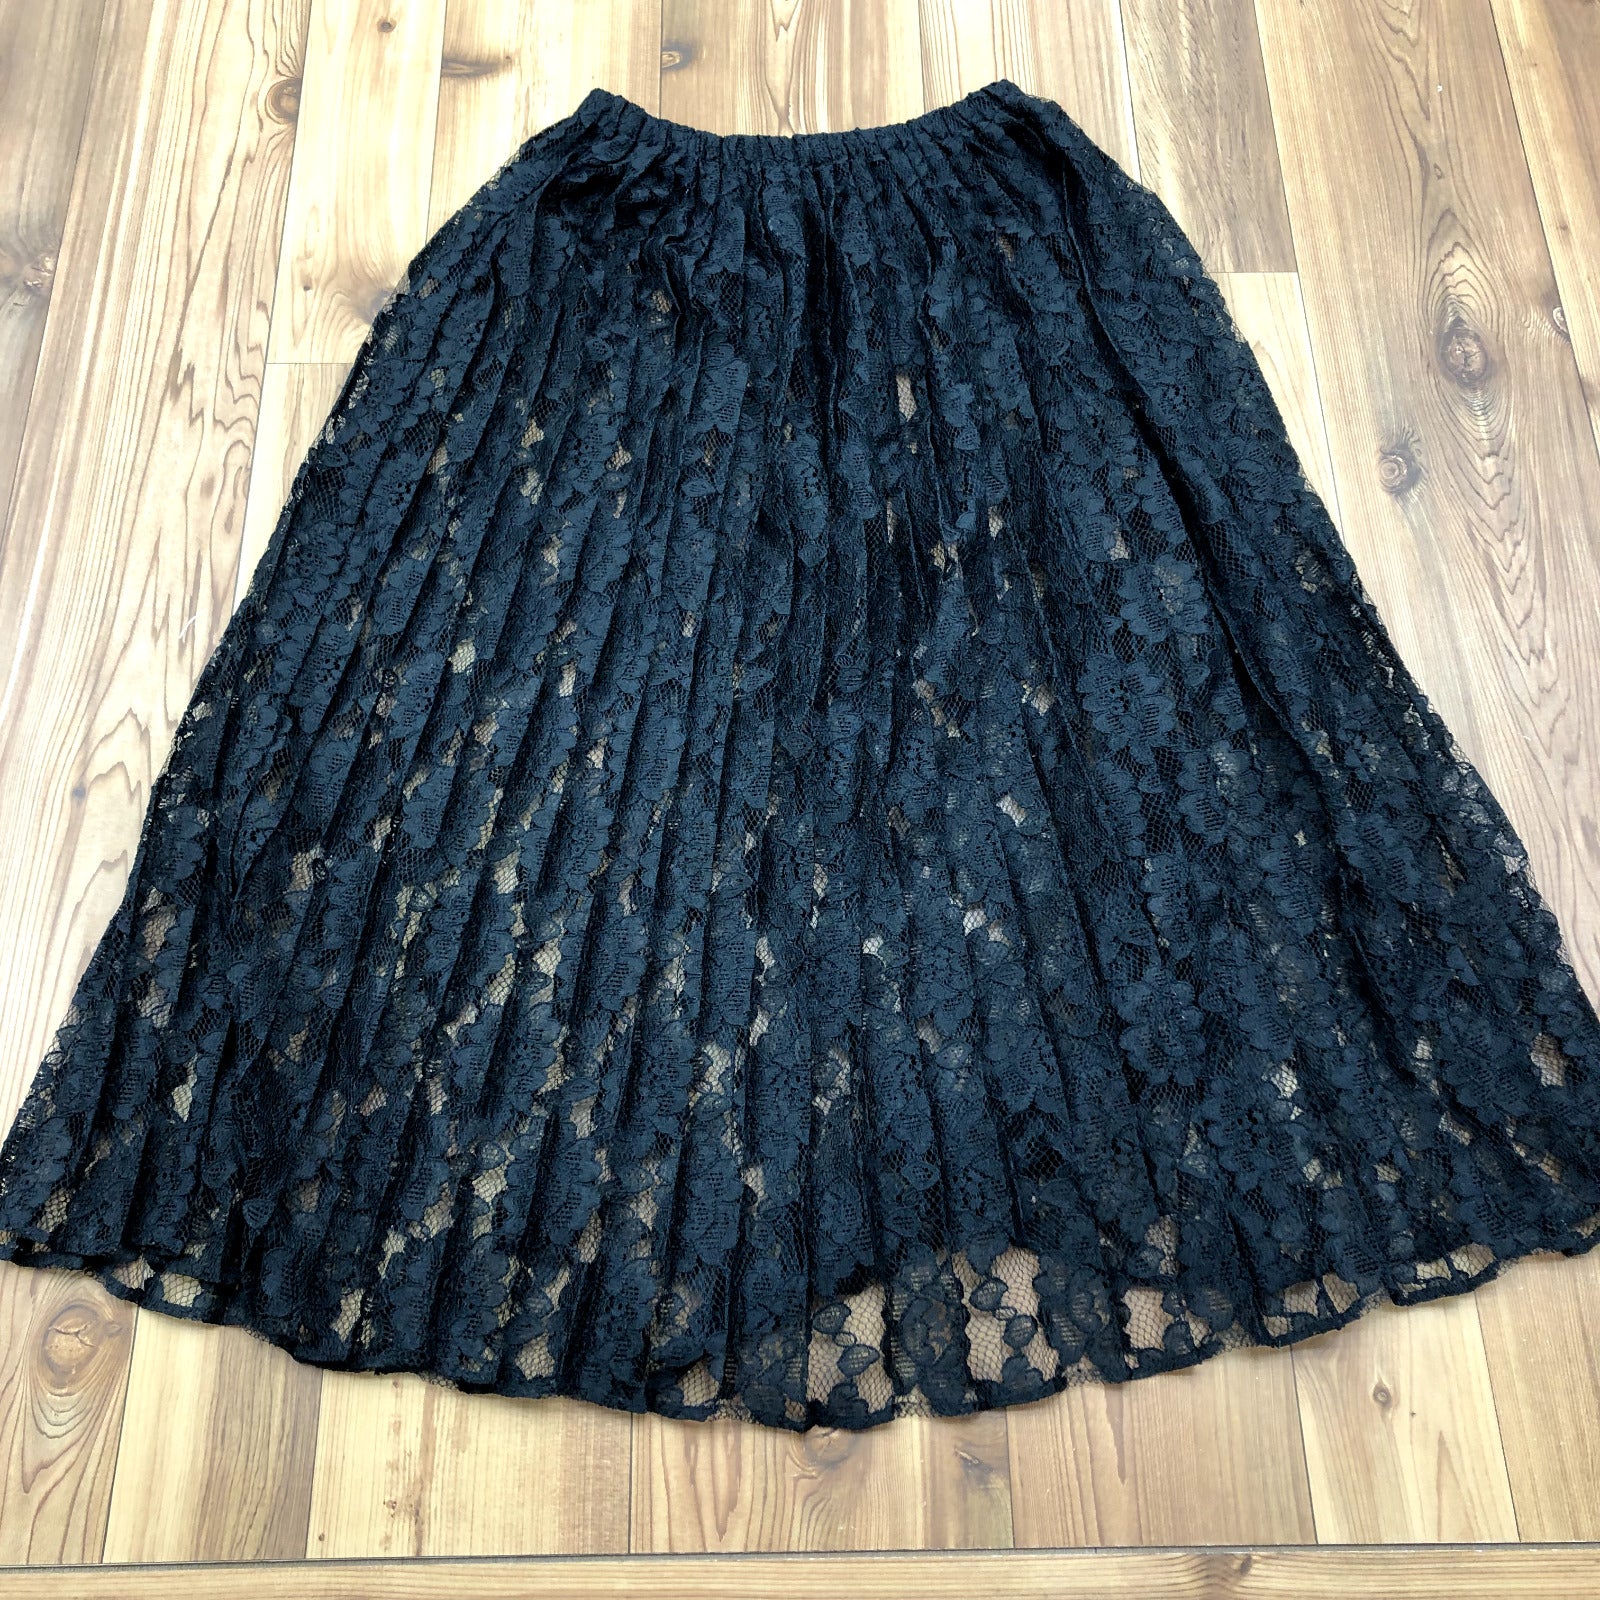 Vintage Latte Black Sheer Laced Elastic Pleated A-line Skirt Women's Size M